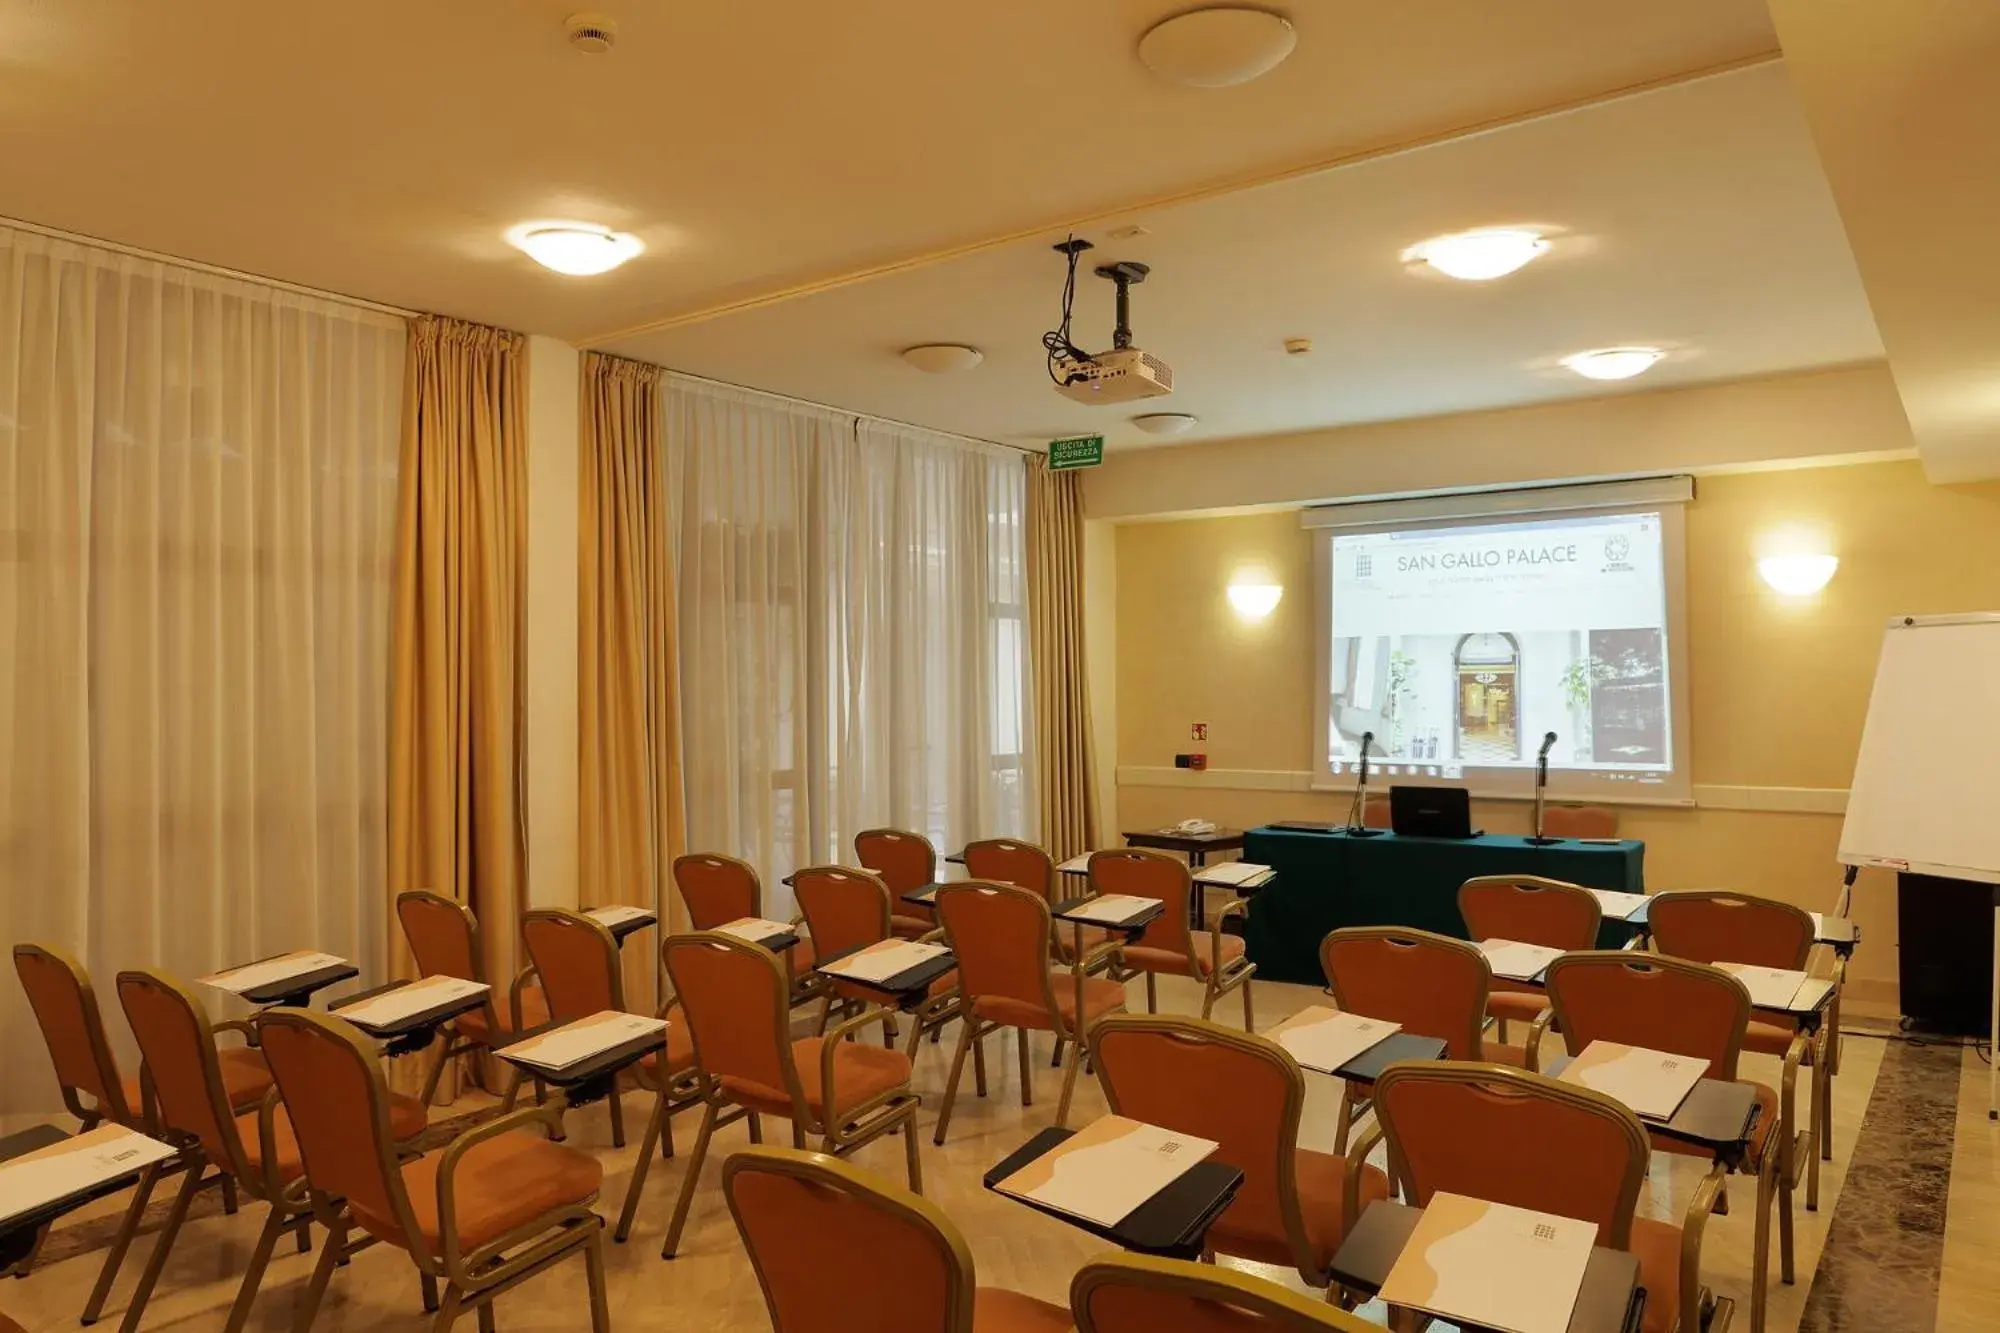 Business facilities in San Gallo Palace Hotel